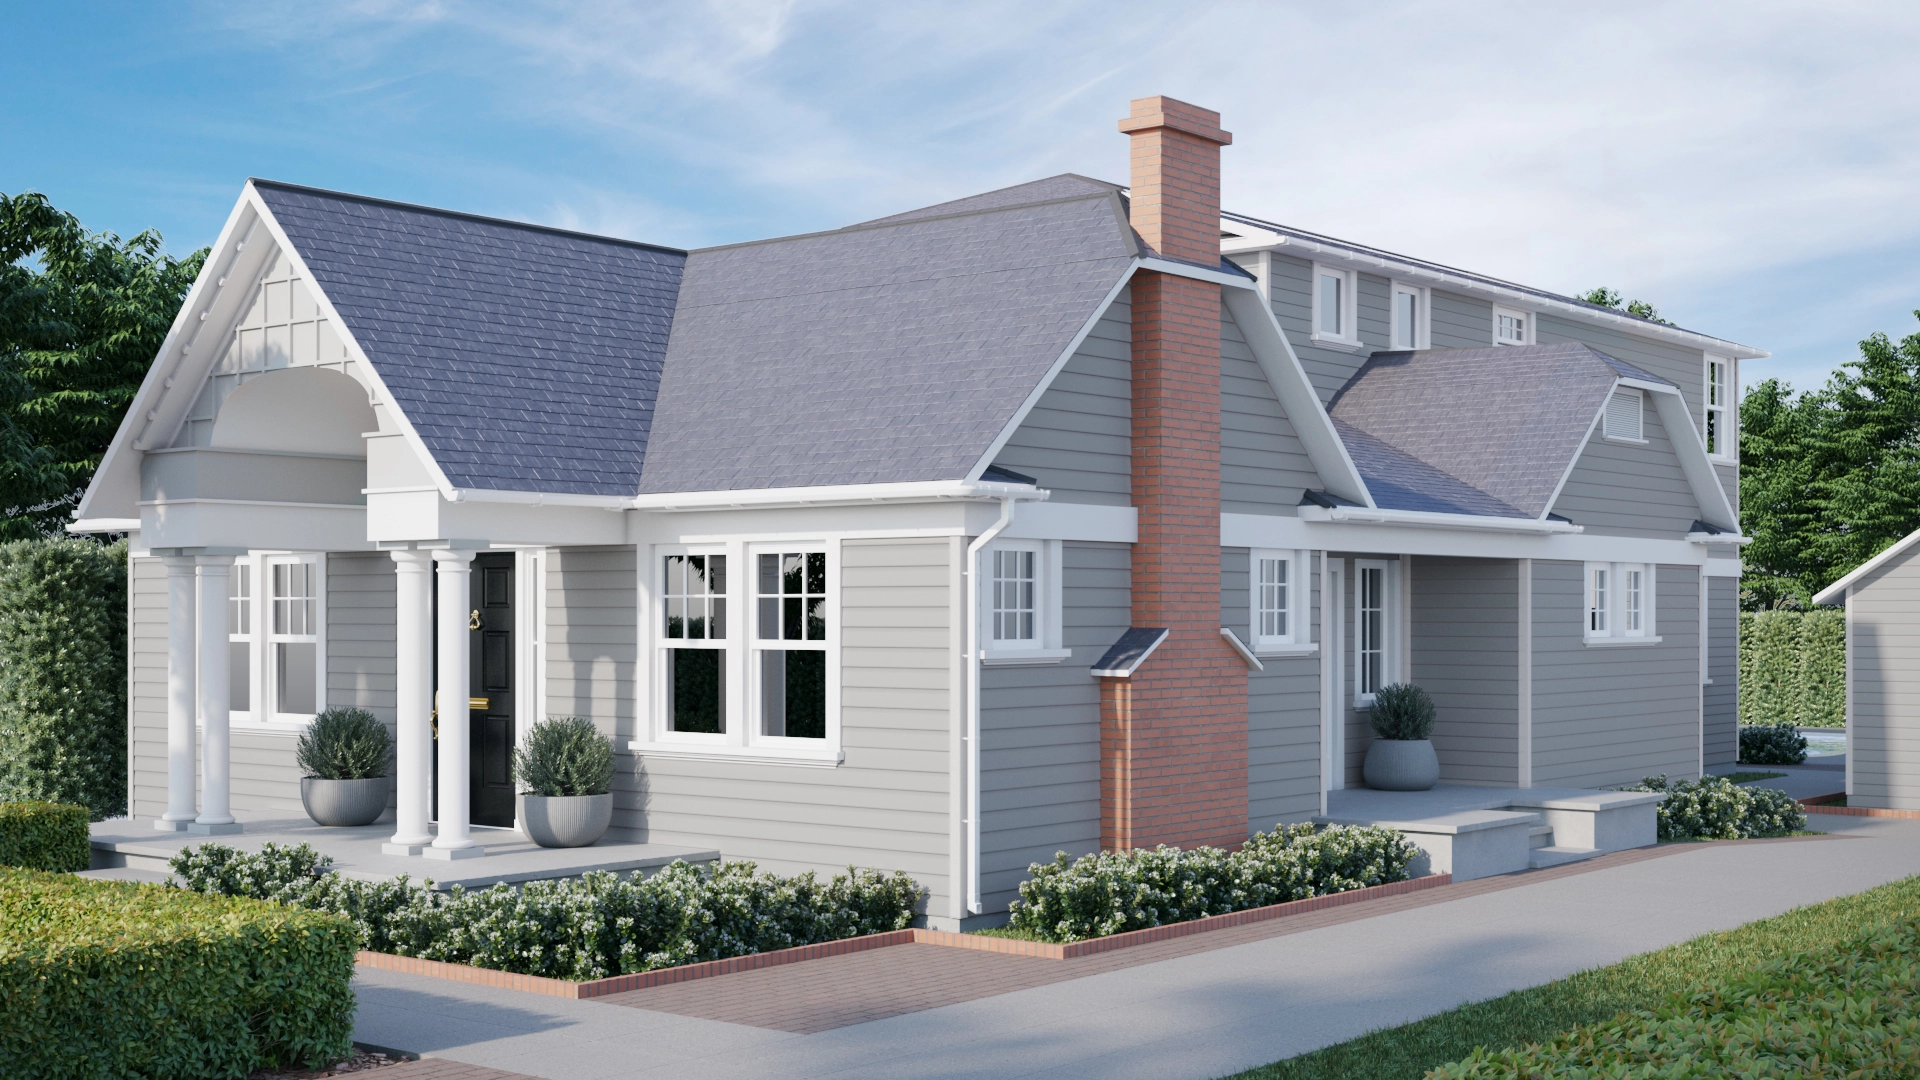 Rendering of major home renovation with a second-story addition.